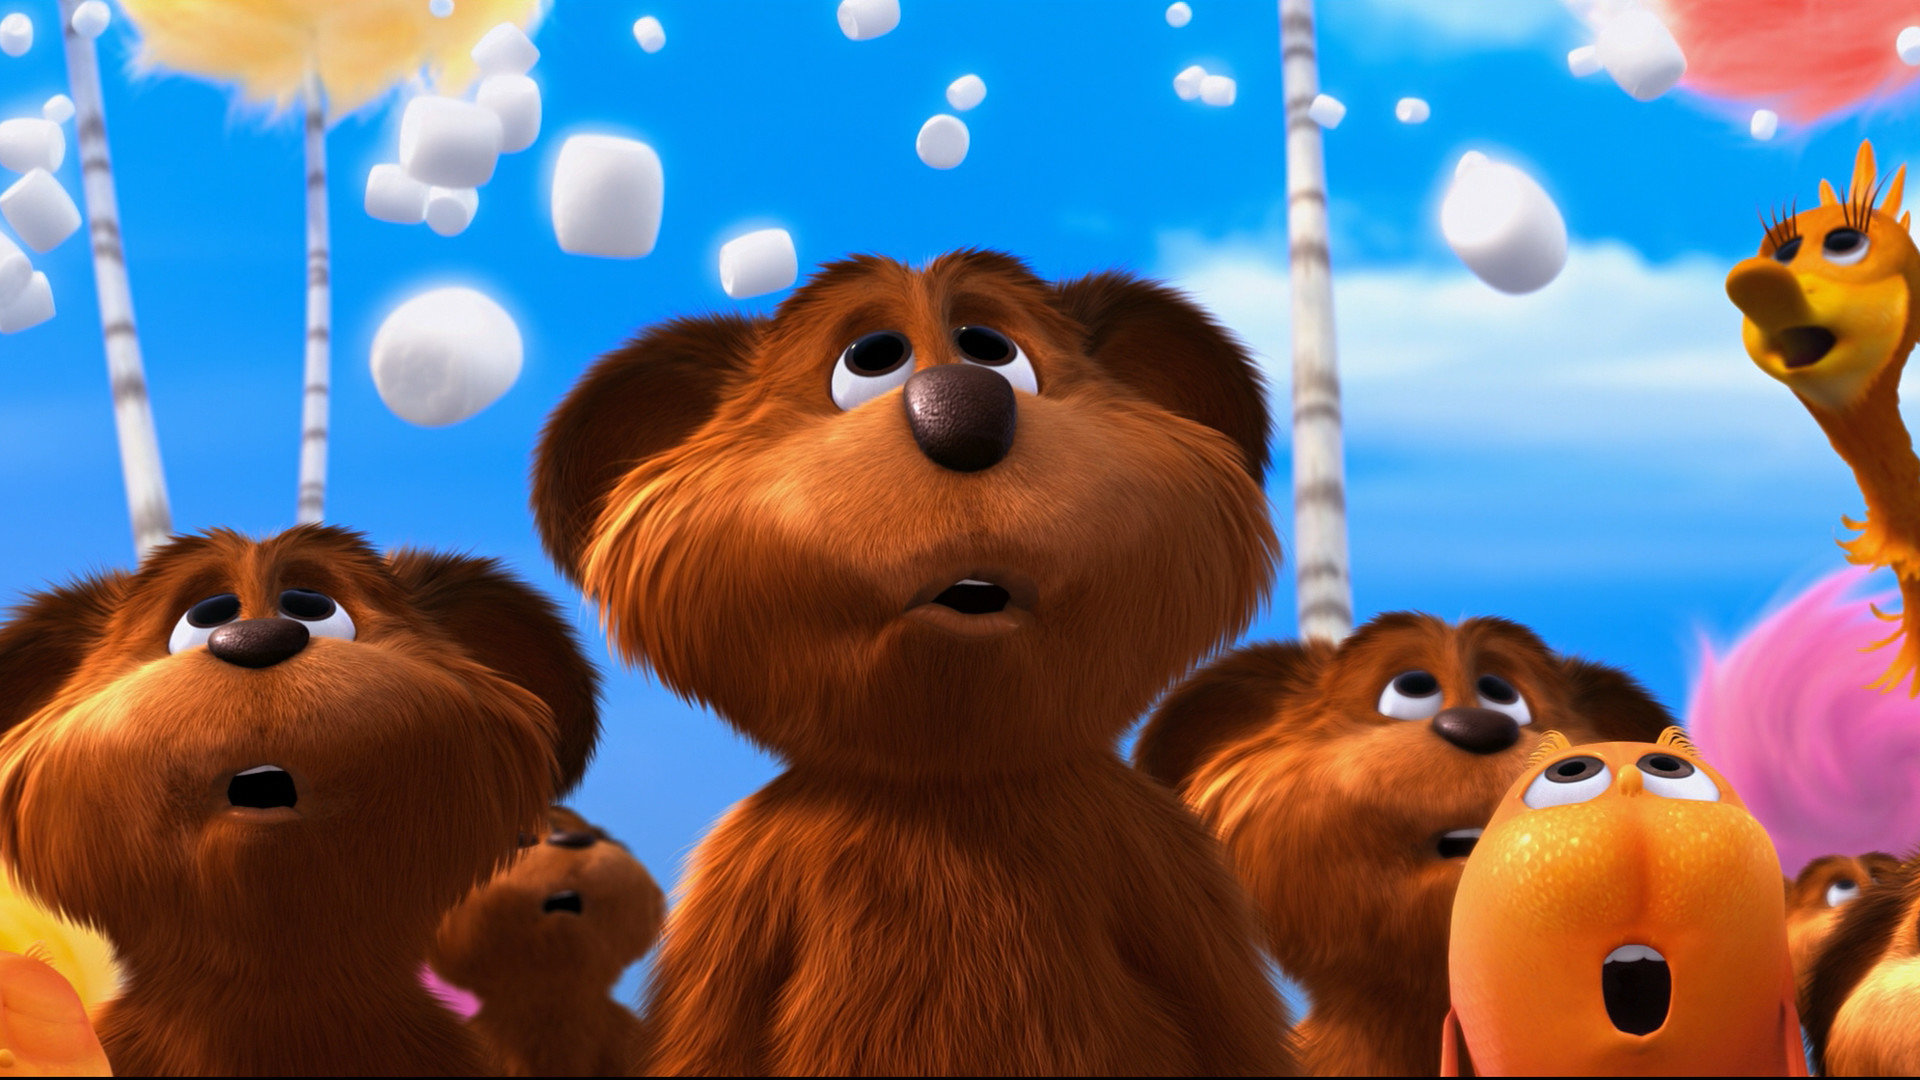 Download full hd 1080p The Lorax computer wallpaper ID:354121 for free